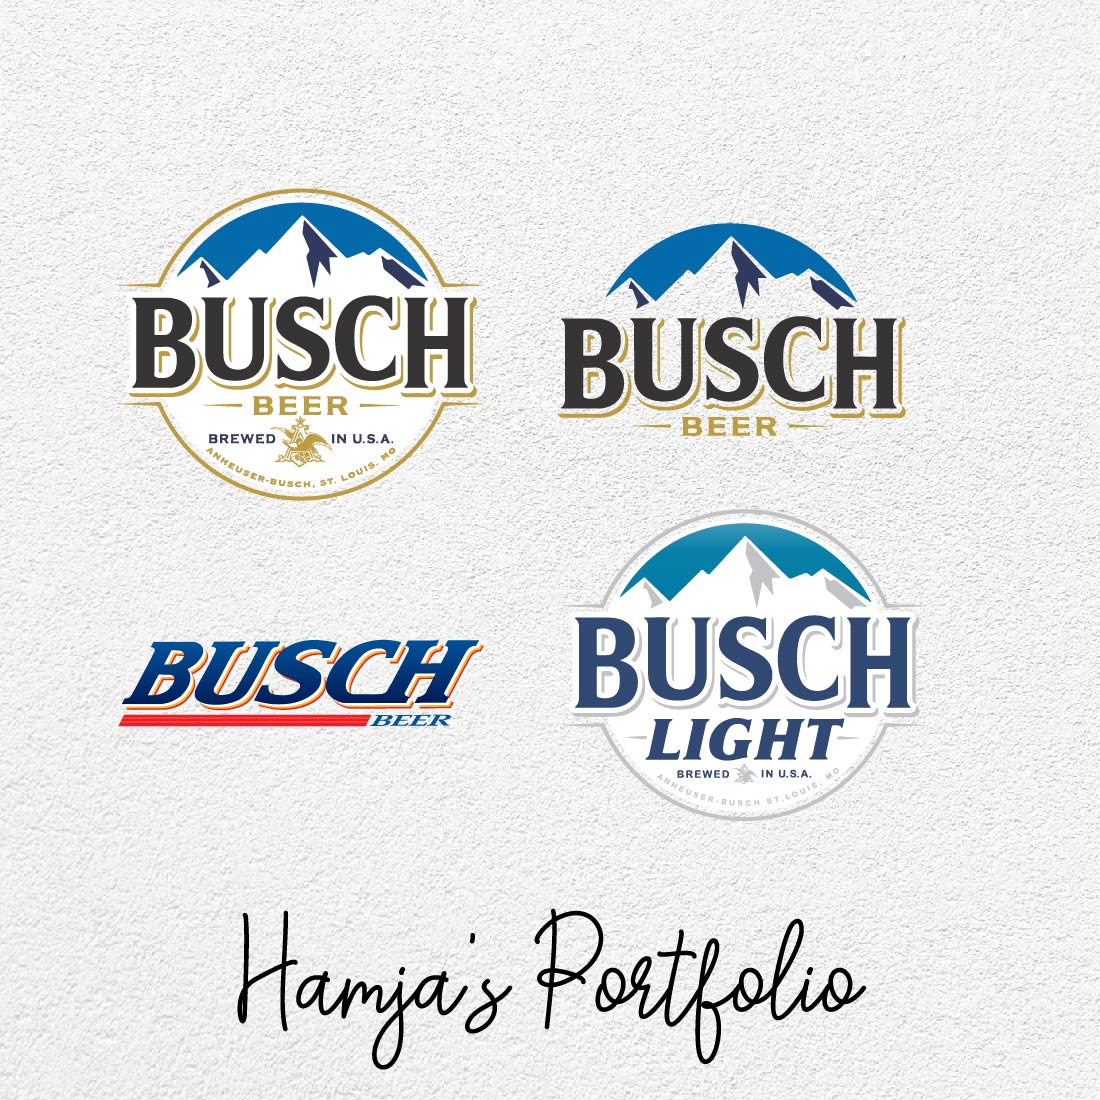 Busch Beer Vector Set cover image.